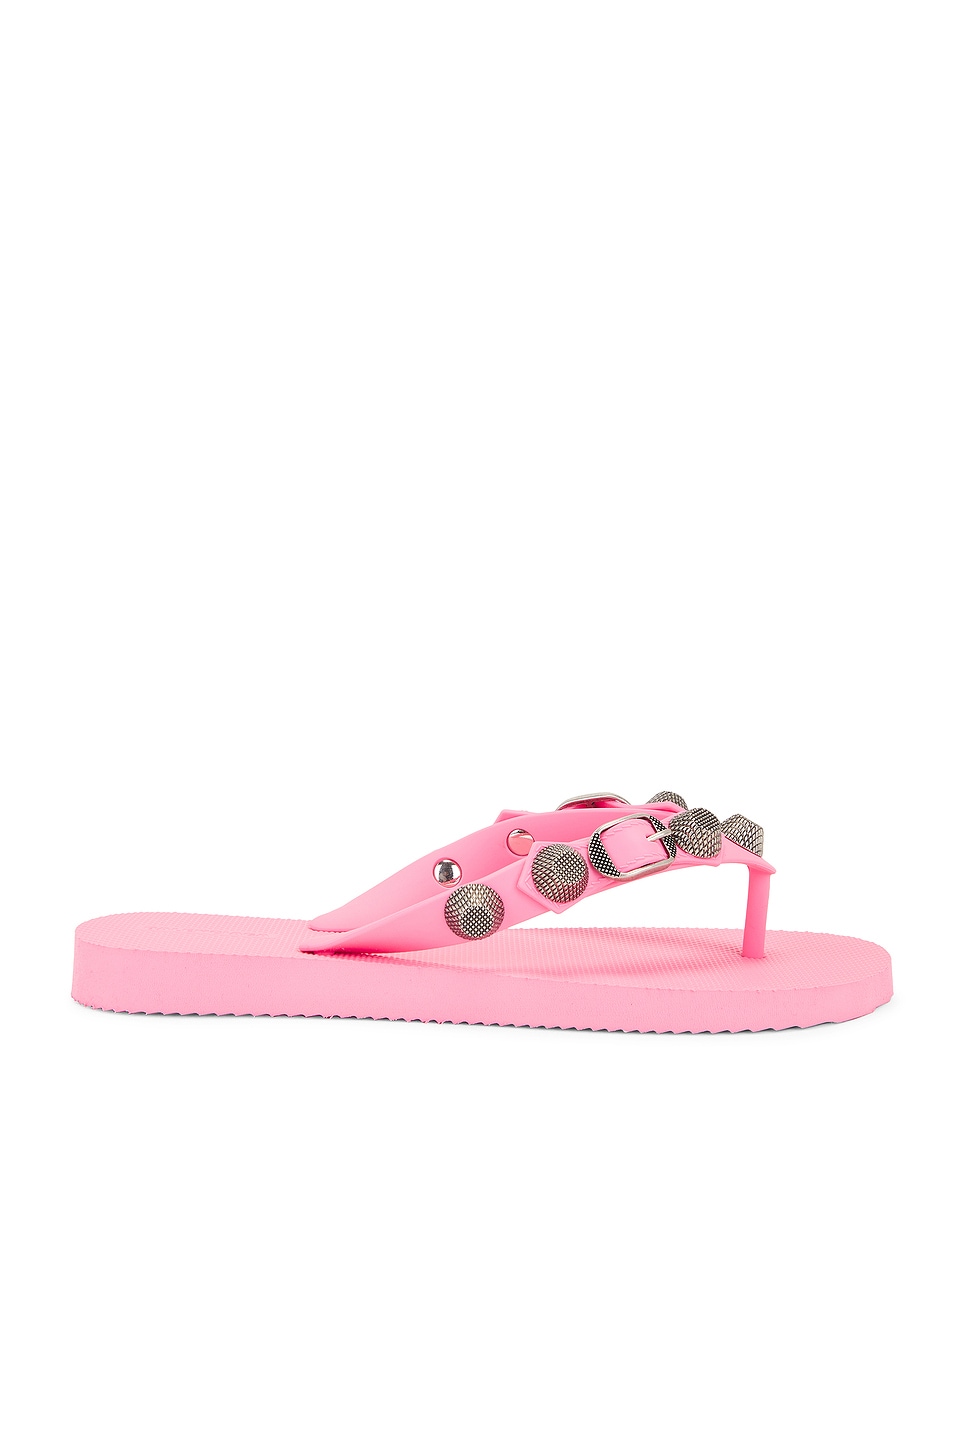 Image 1 of Balenciaga Cagole Thong Sandal in Light Pink & Silver